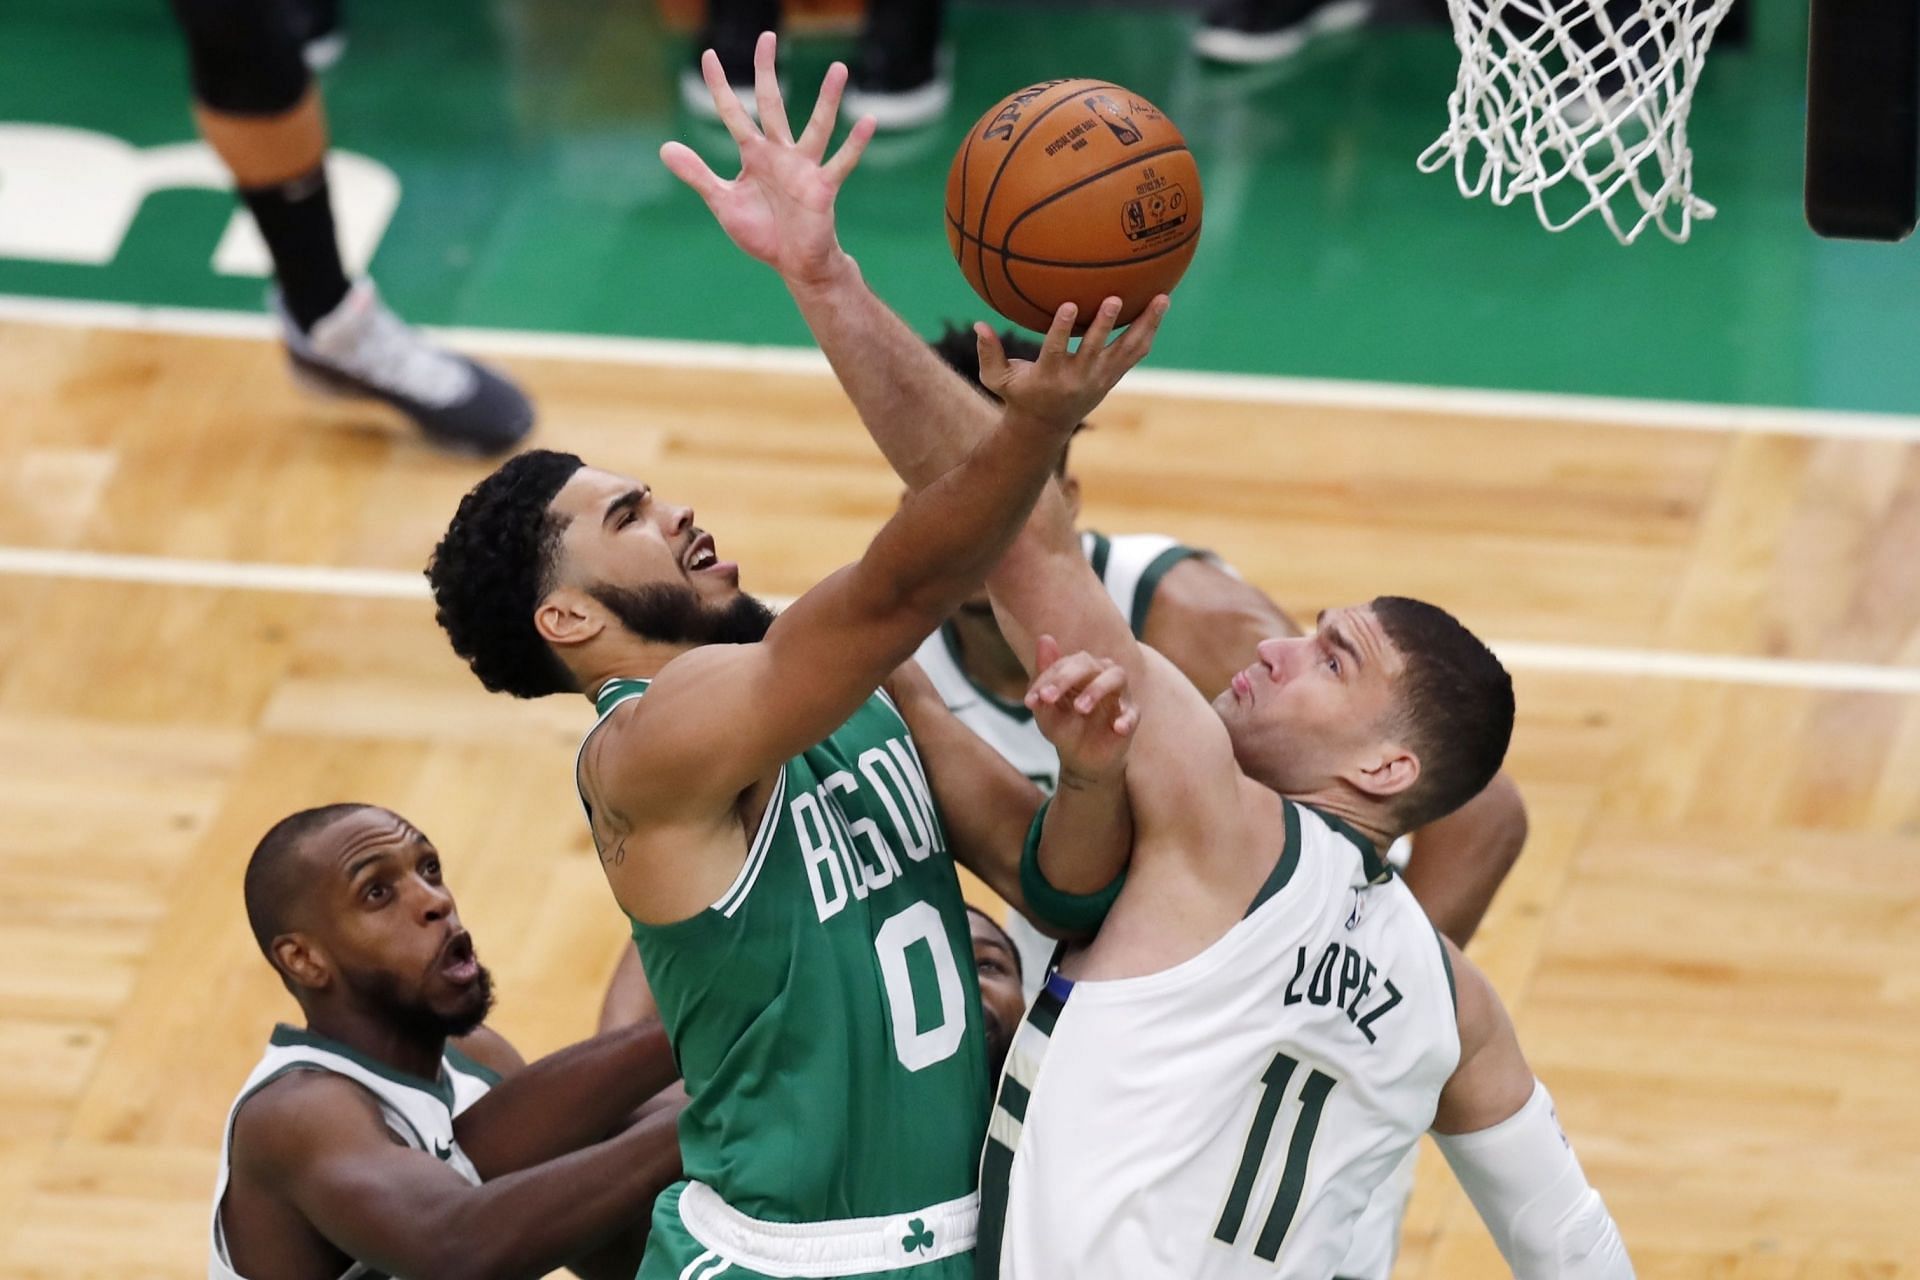 The Boston Celtics regained their home ground advantage after winning the decisive road win against the defending champions. [Photo: Bleacher Report]